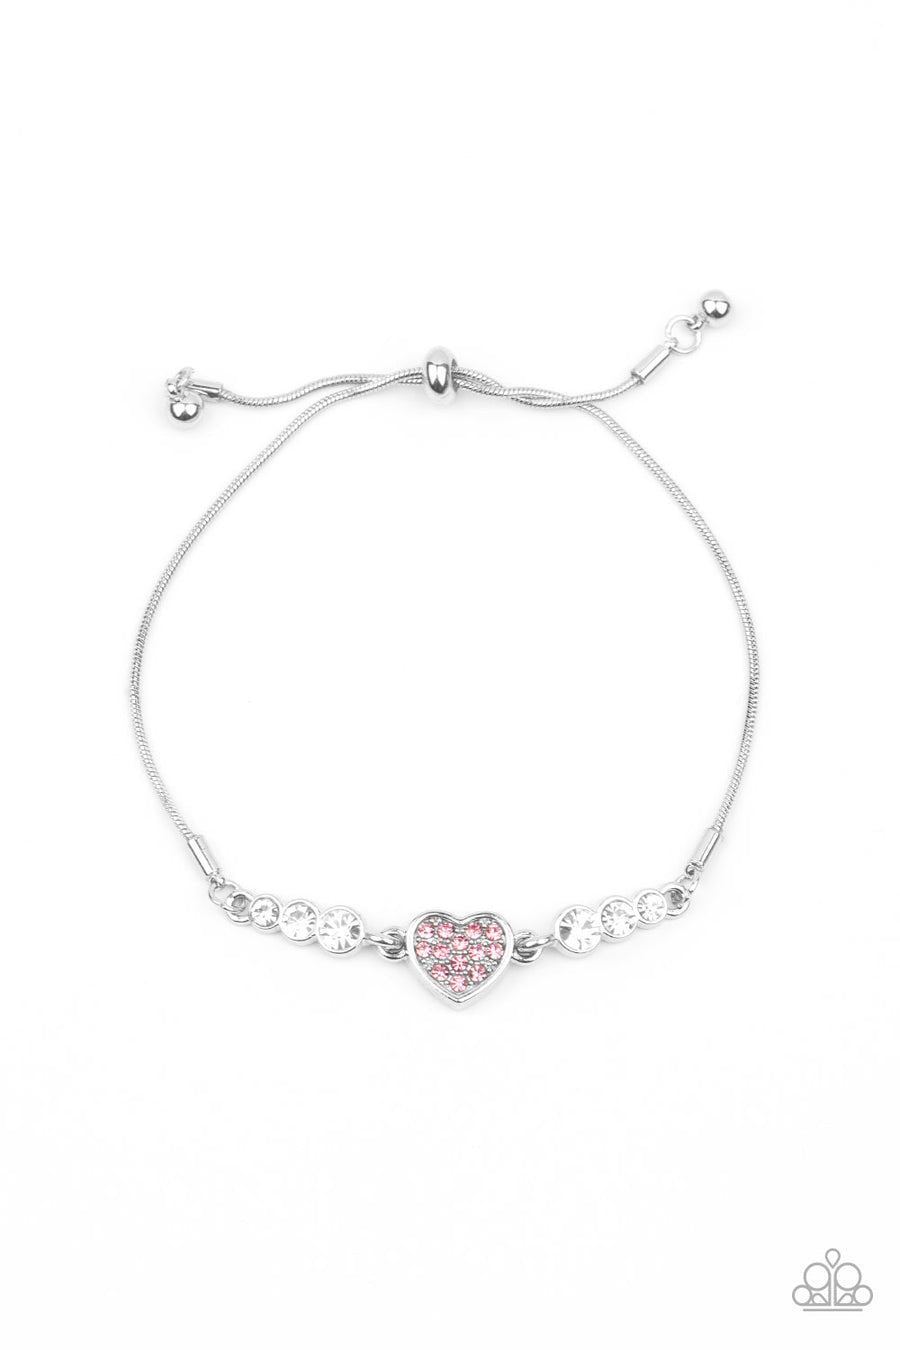 Paparazzi Big-Hearted Beam - Pink Bracelet - A Finishing Touch Jewelry